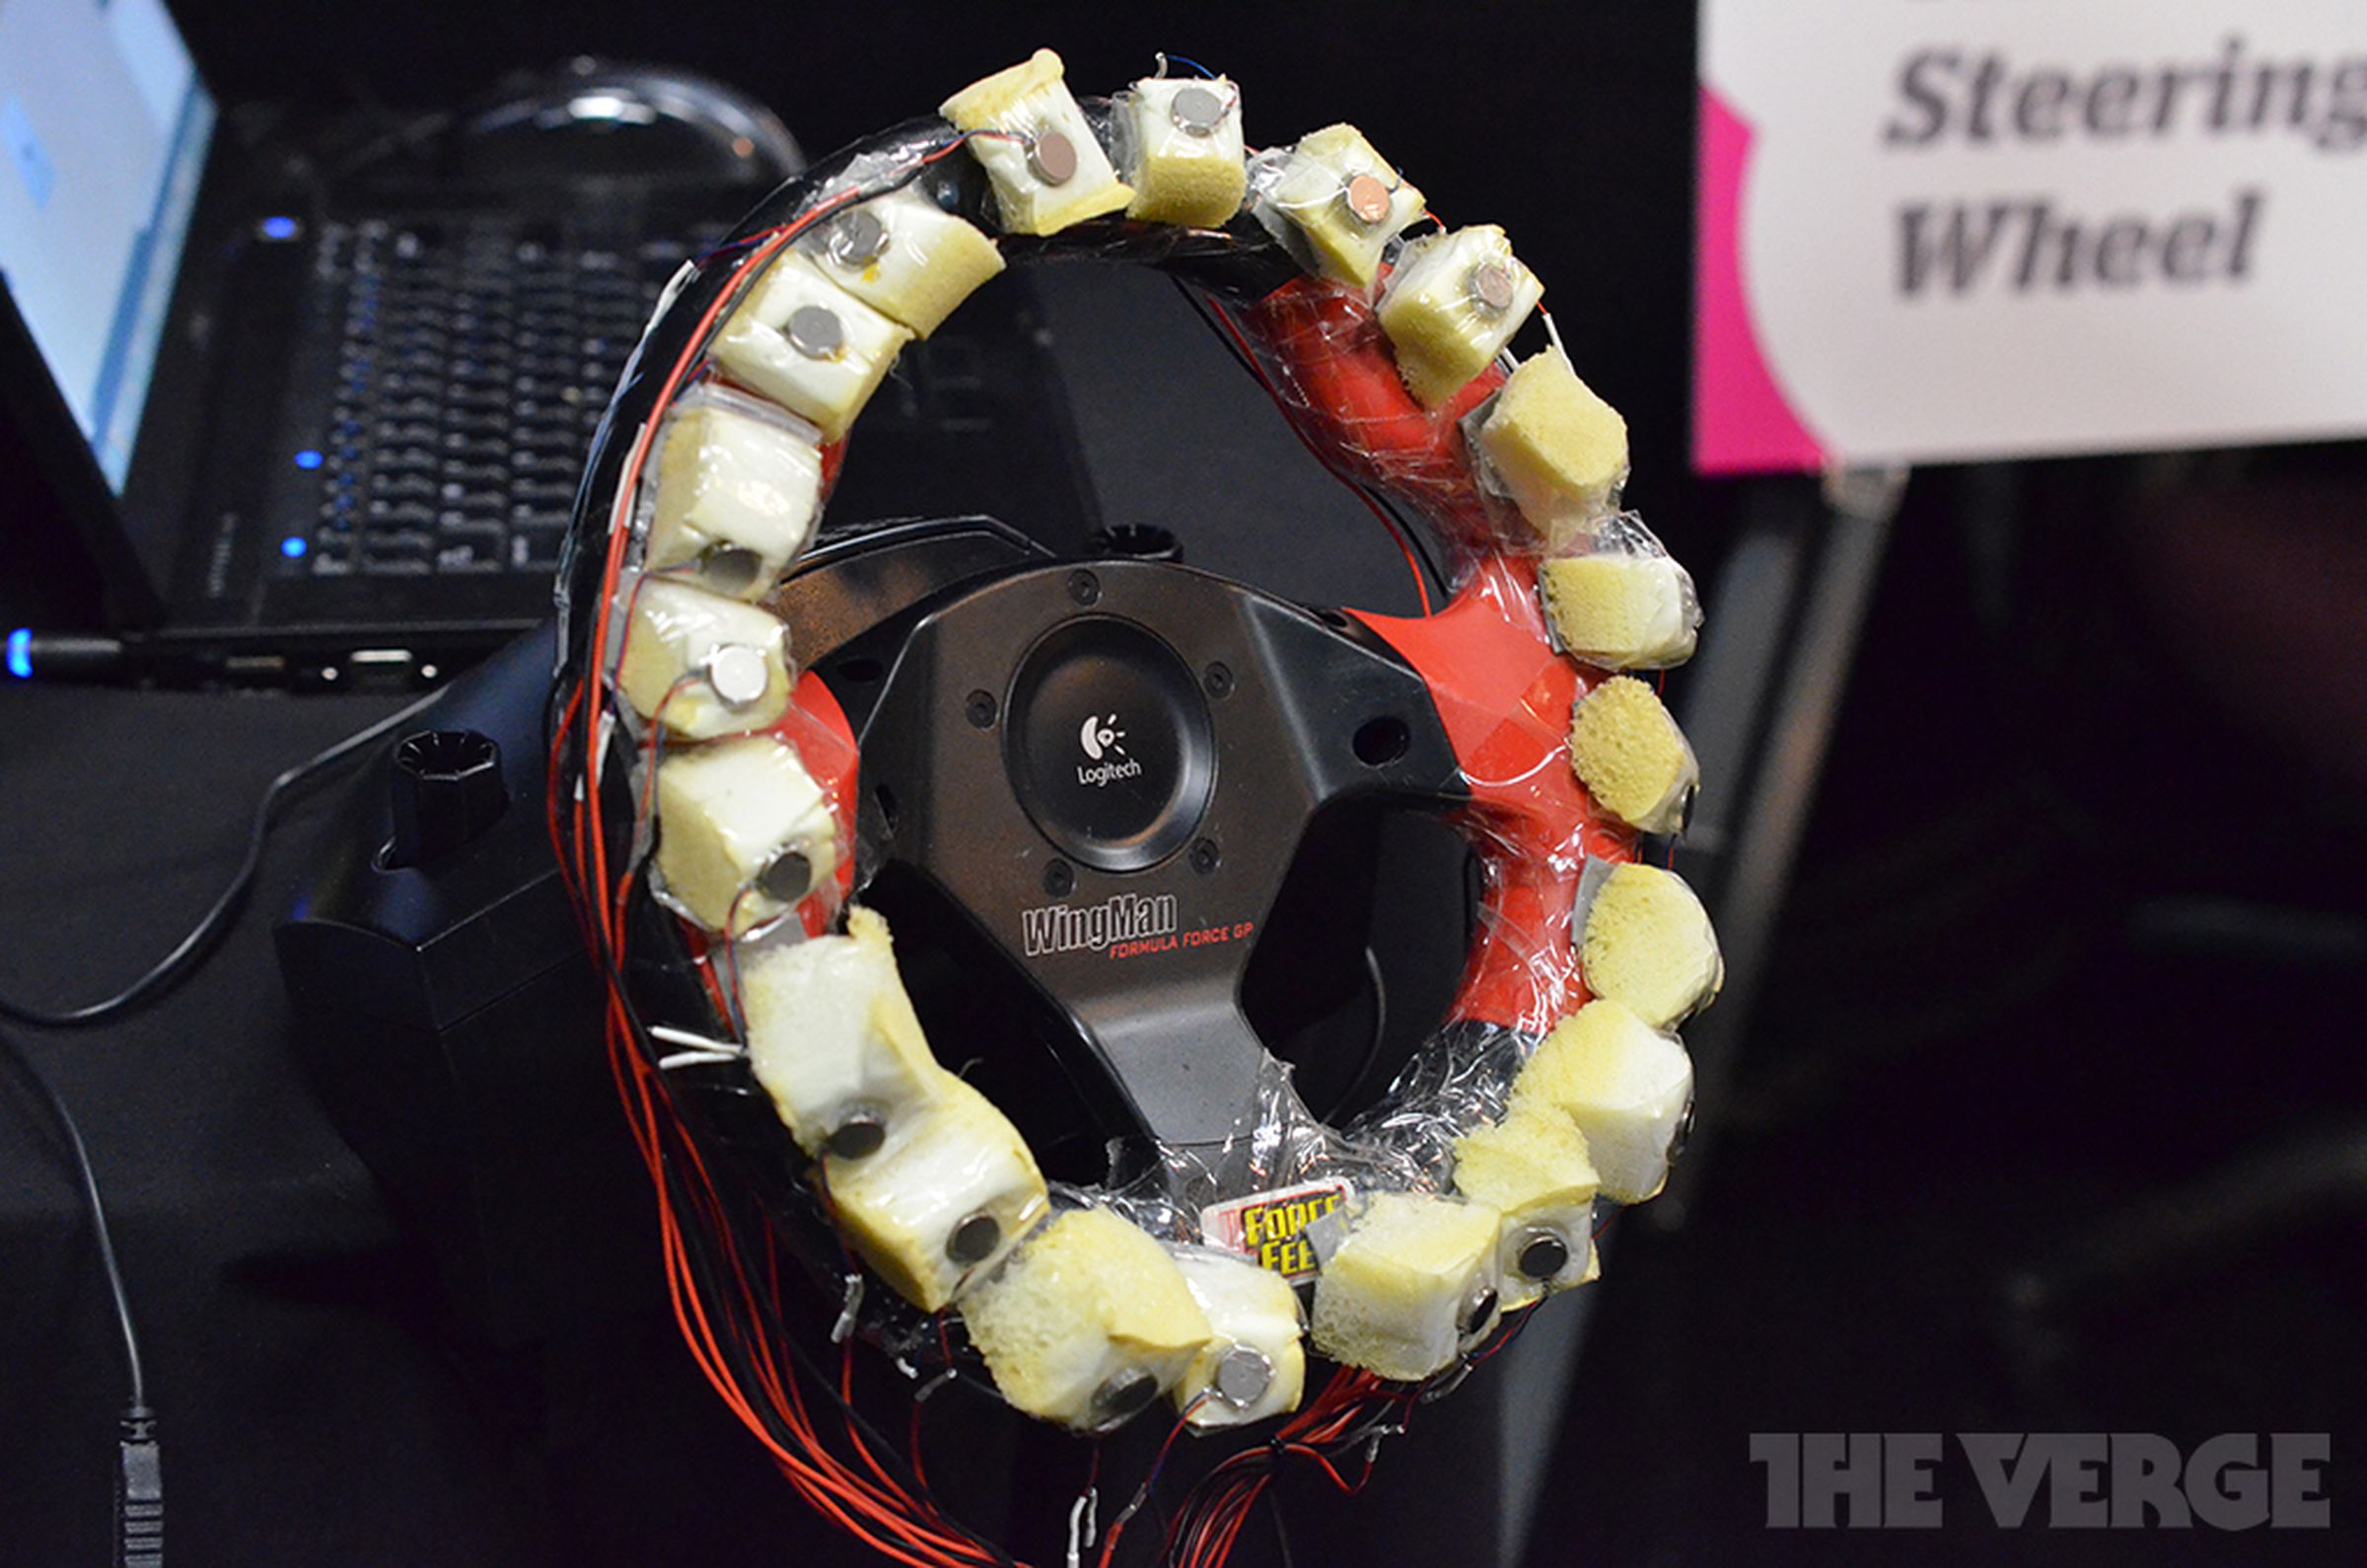 AT&T Labs haptic feedback steering wheel prototype (hands-on pictures)